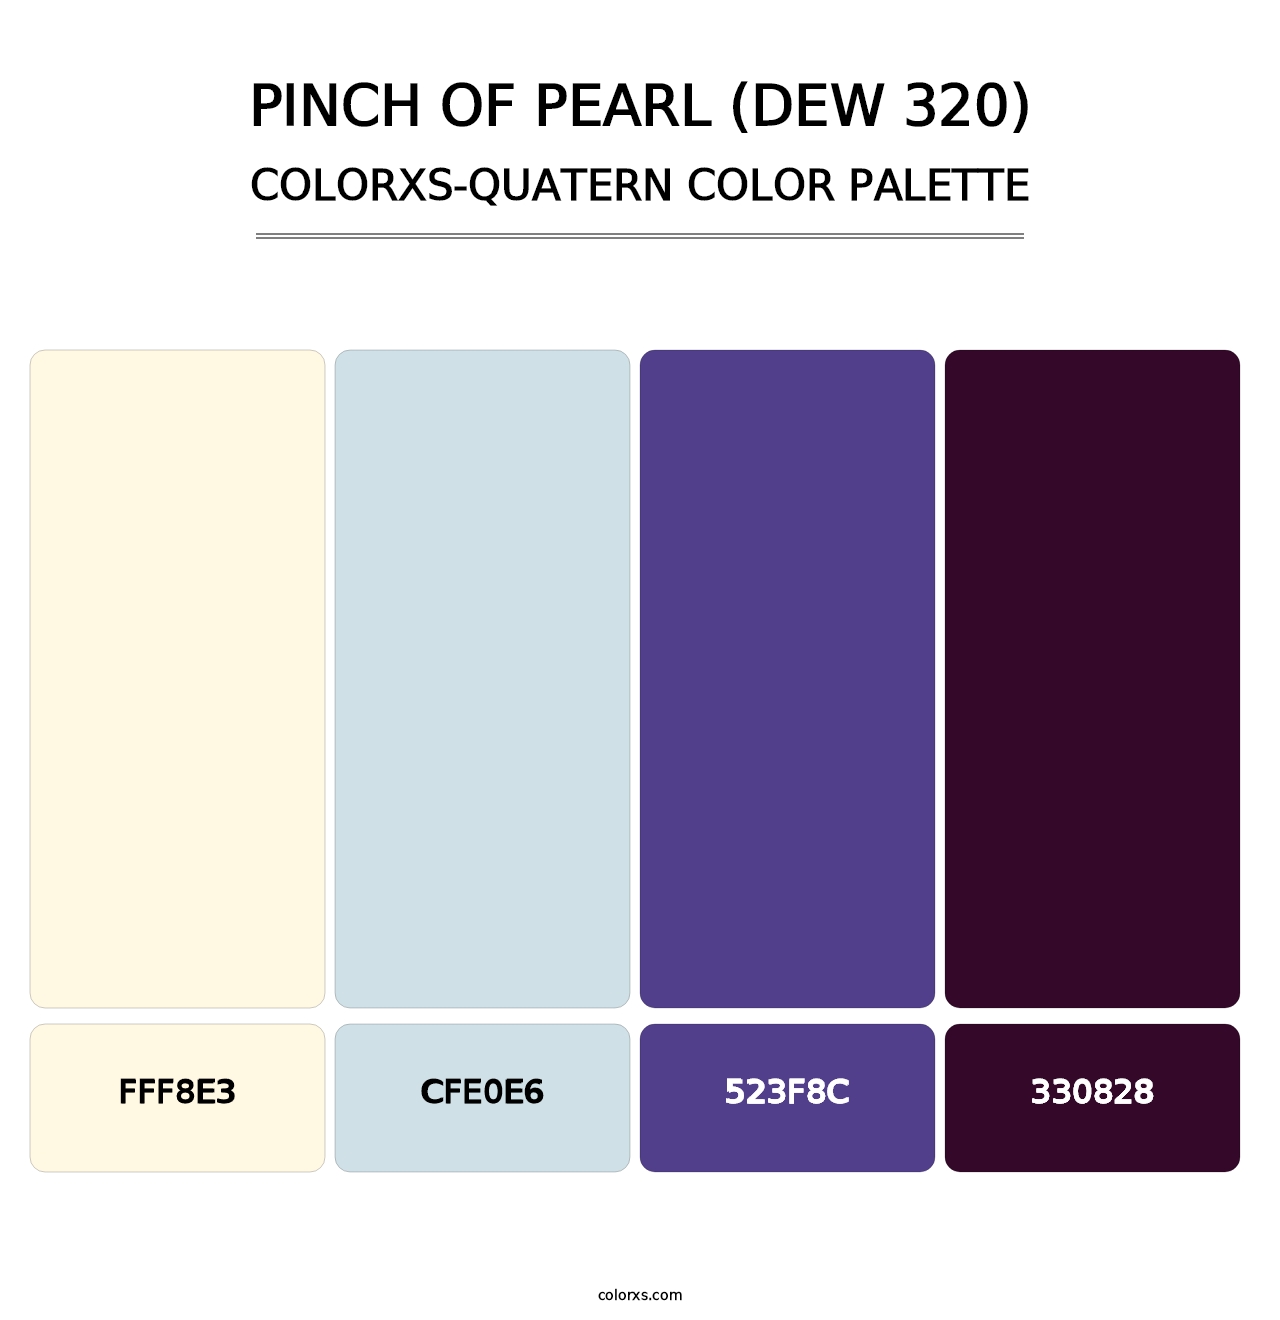 Pinch of Pearl (DEW 320) - Colorxs Quatern Palette